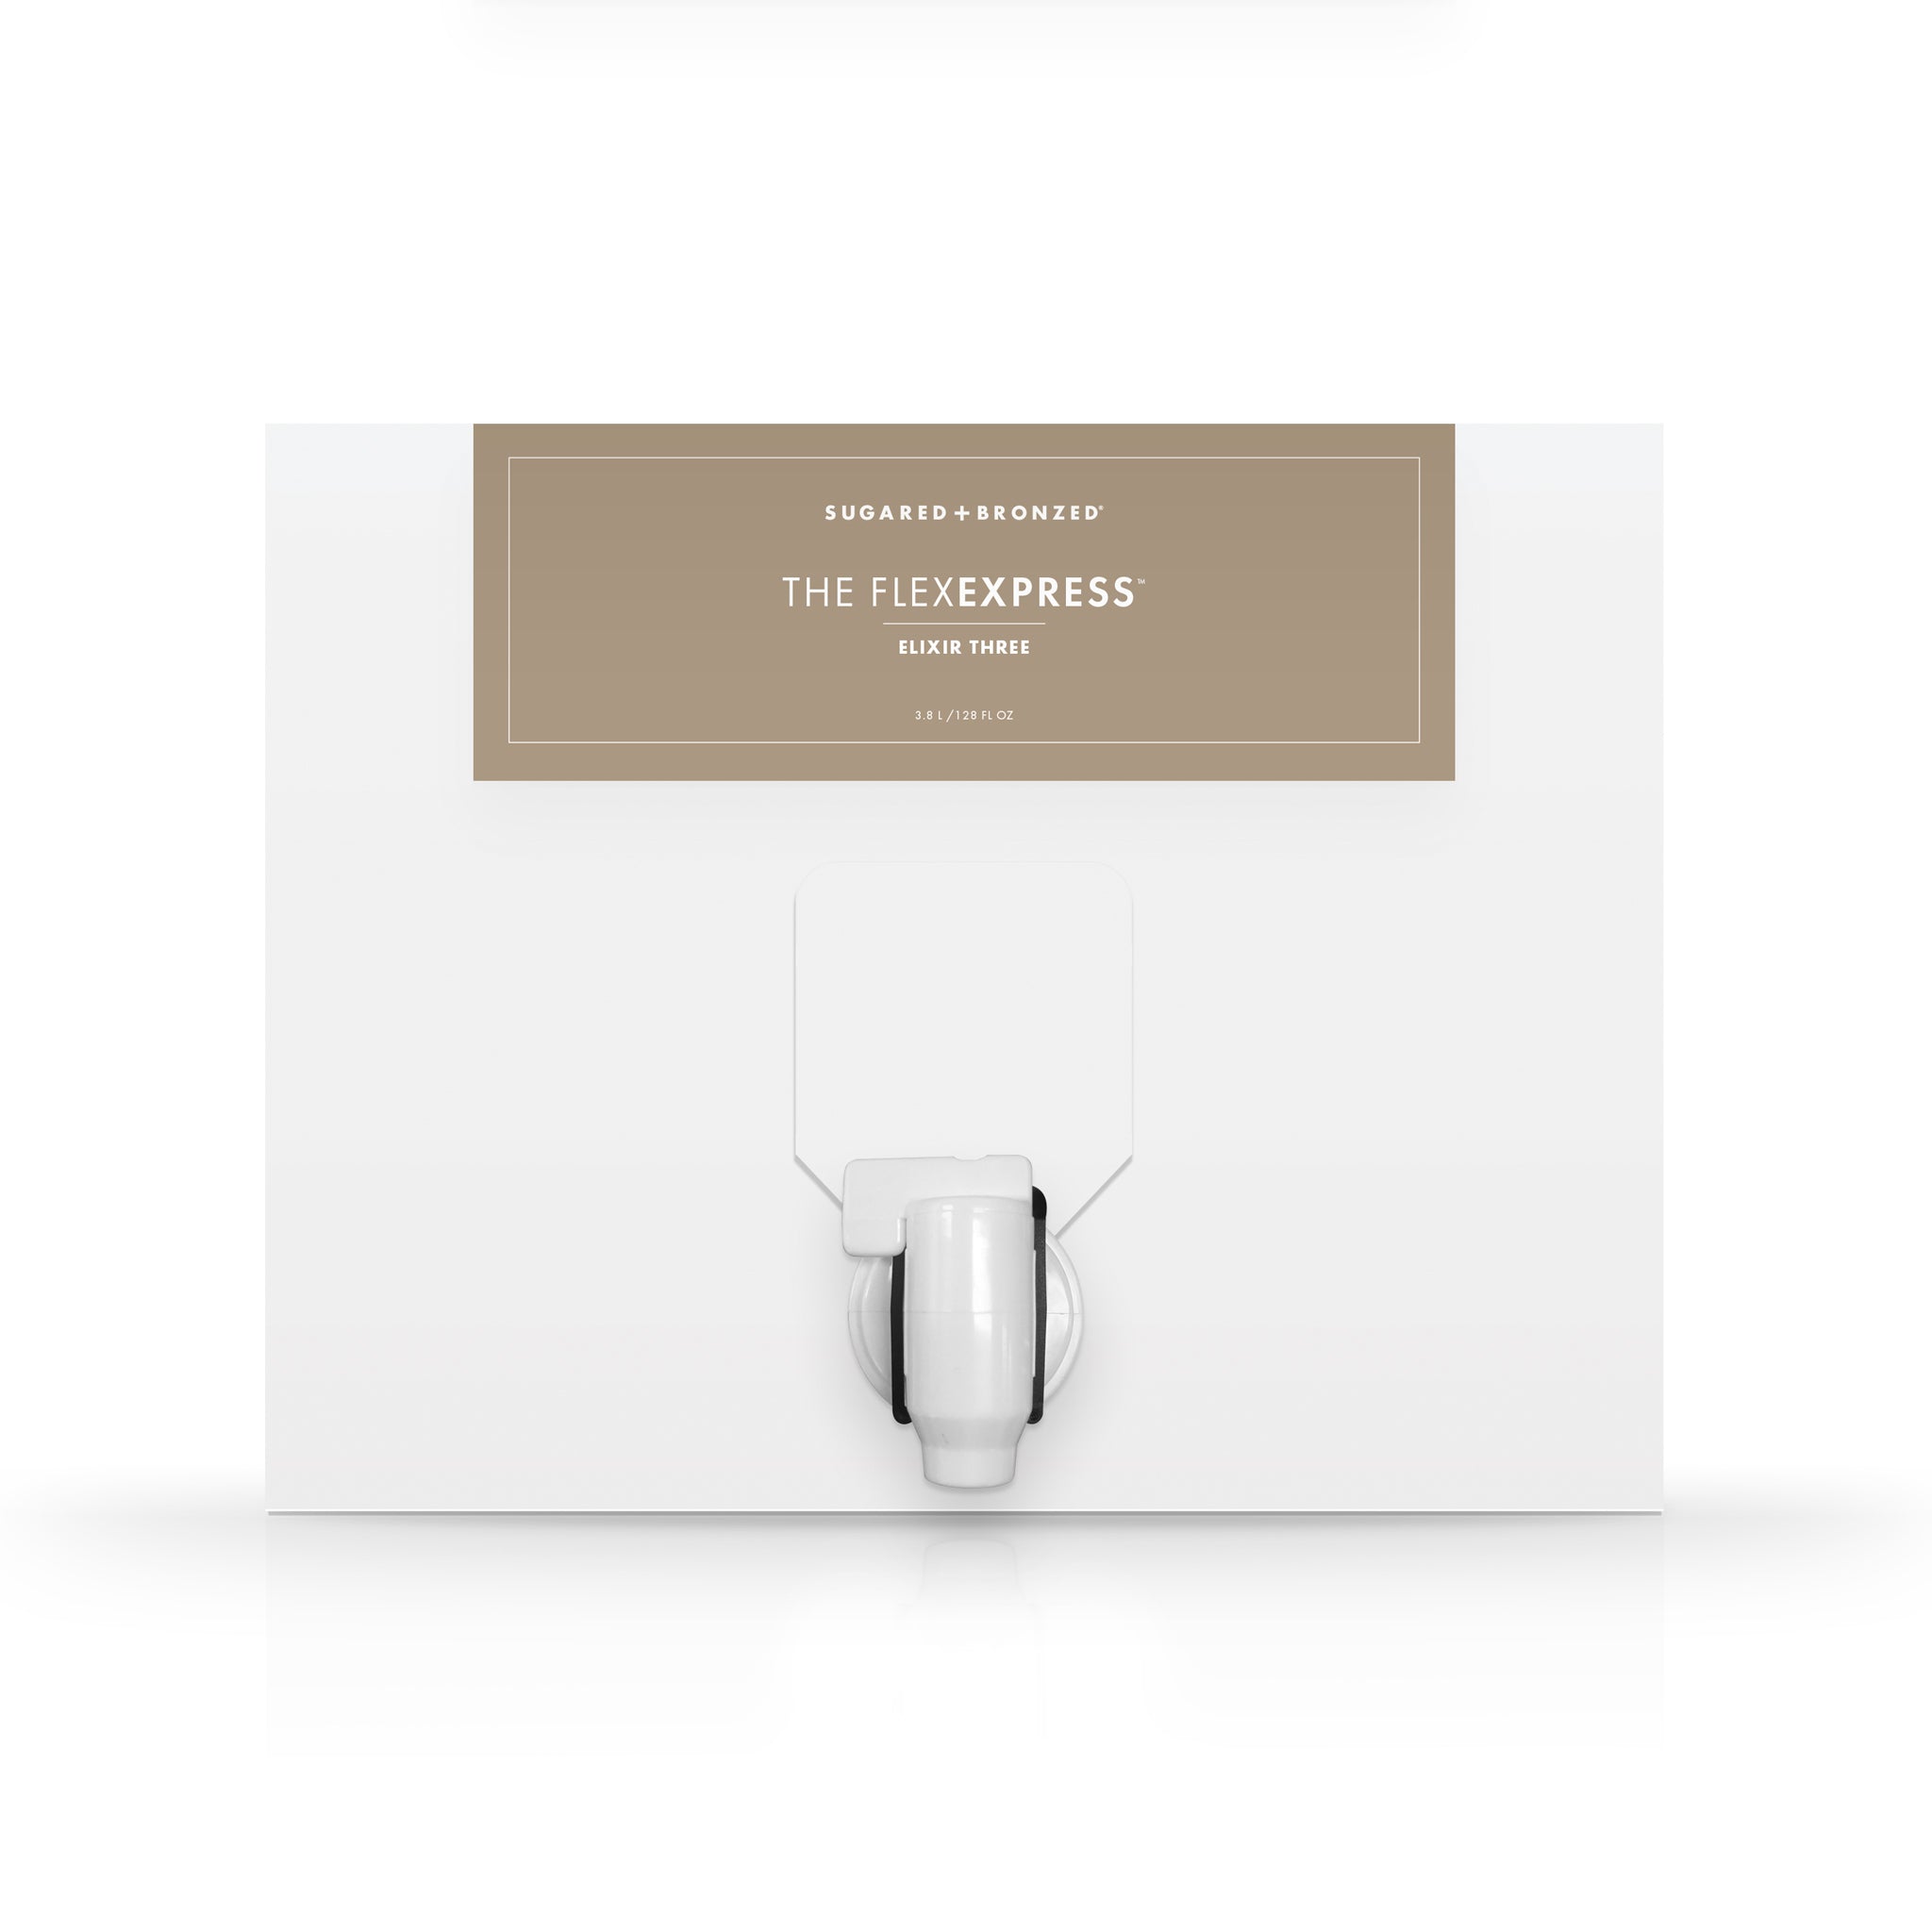 A white box with a dispenser faucet for Elixir Three tanning solution